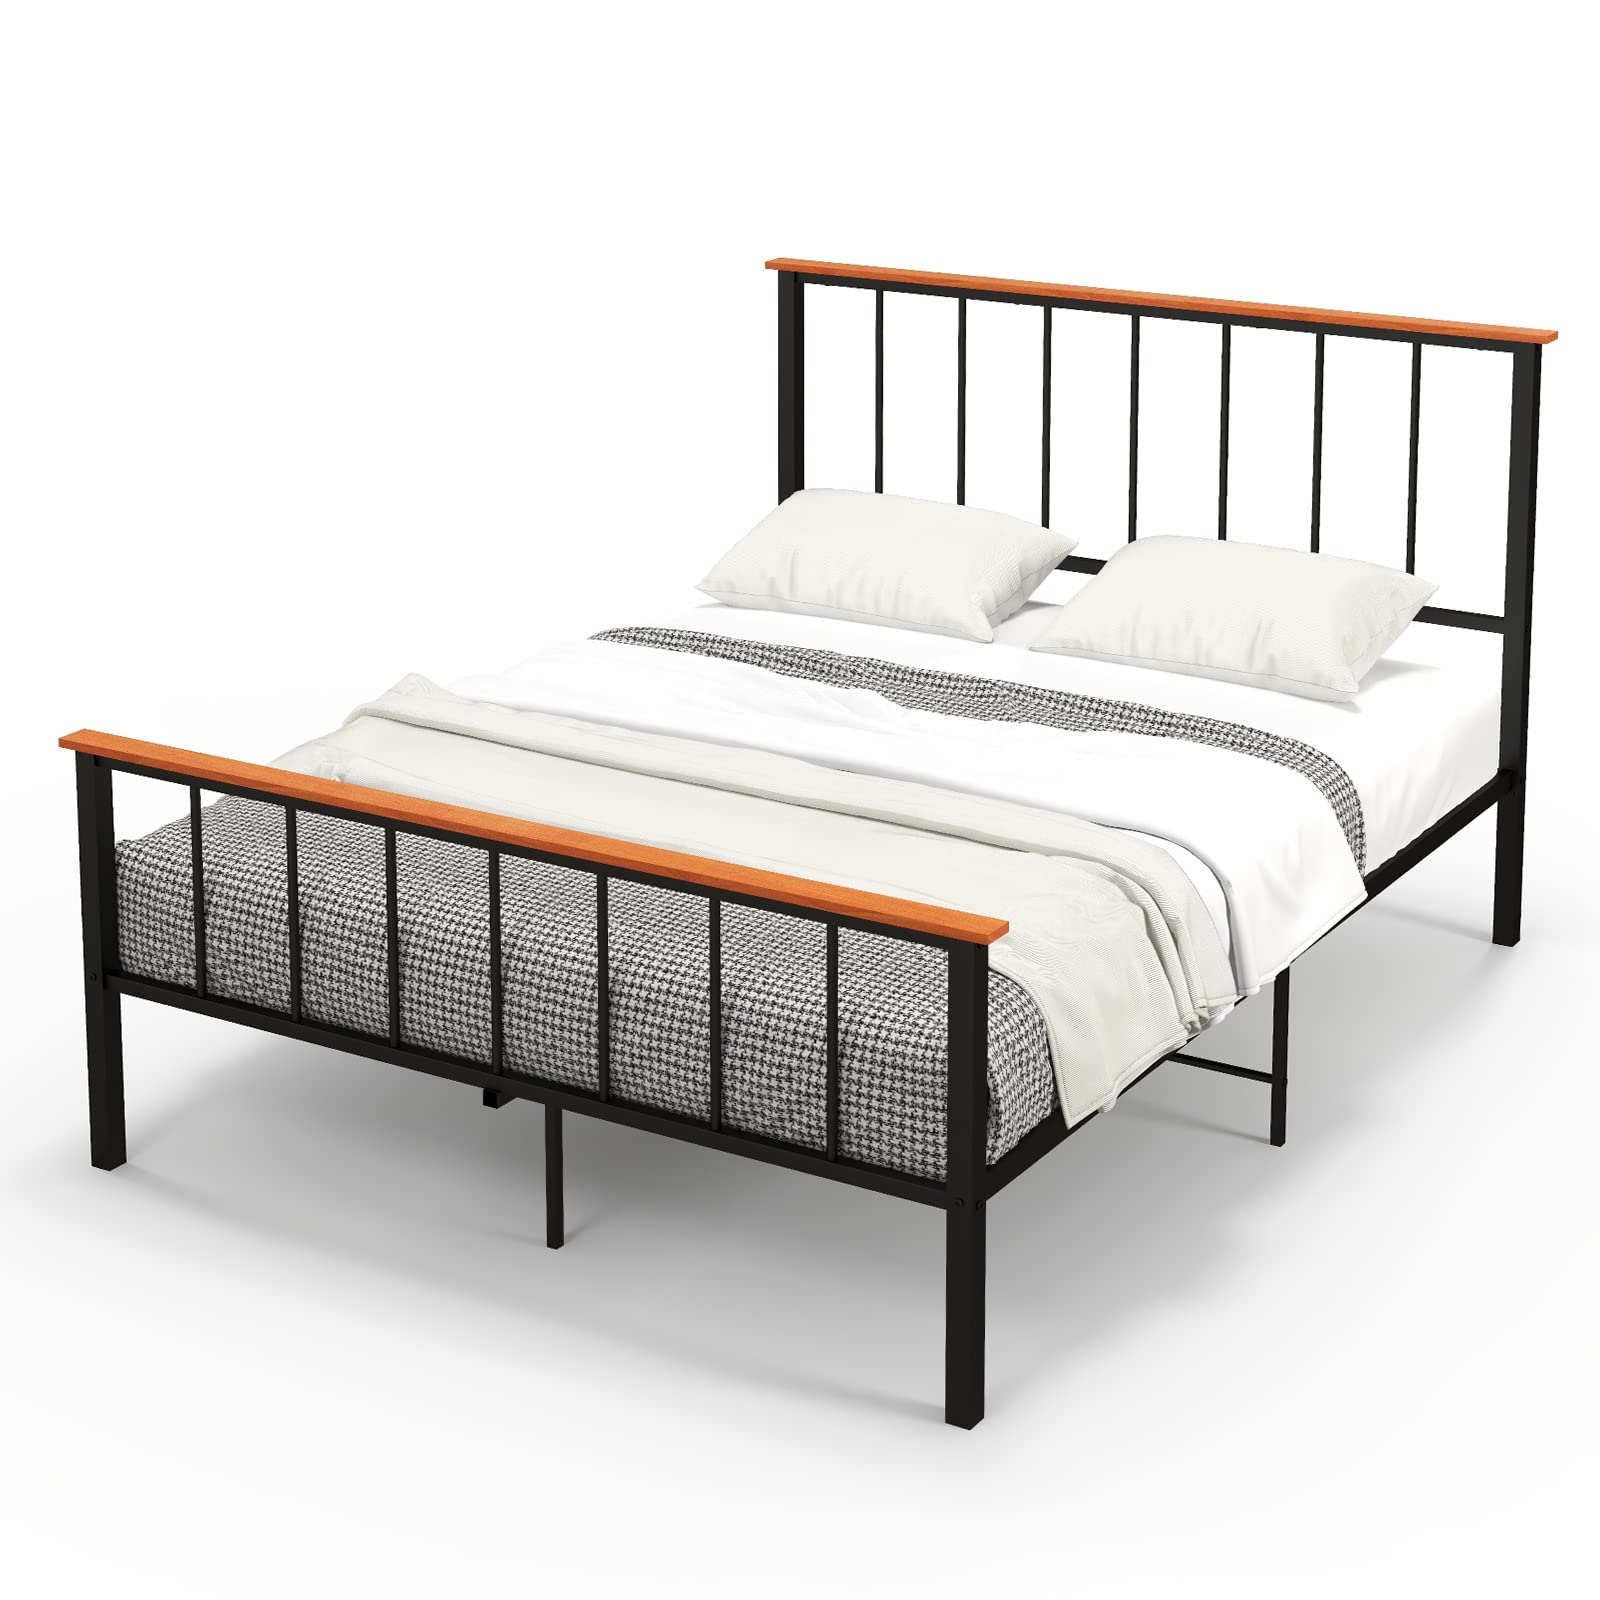 Giantex Queen/Full Size Metal Platform Bed Frame with Spindle Headboard & Footboard, Black